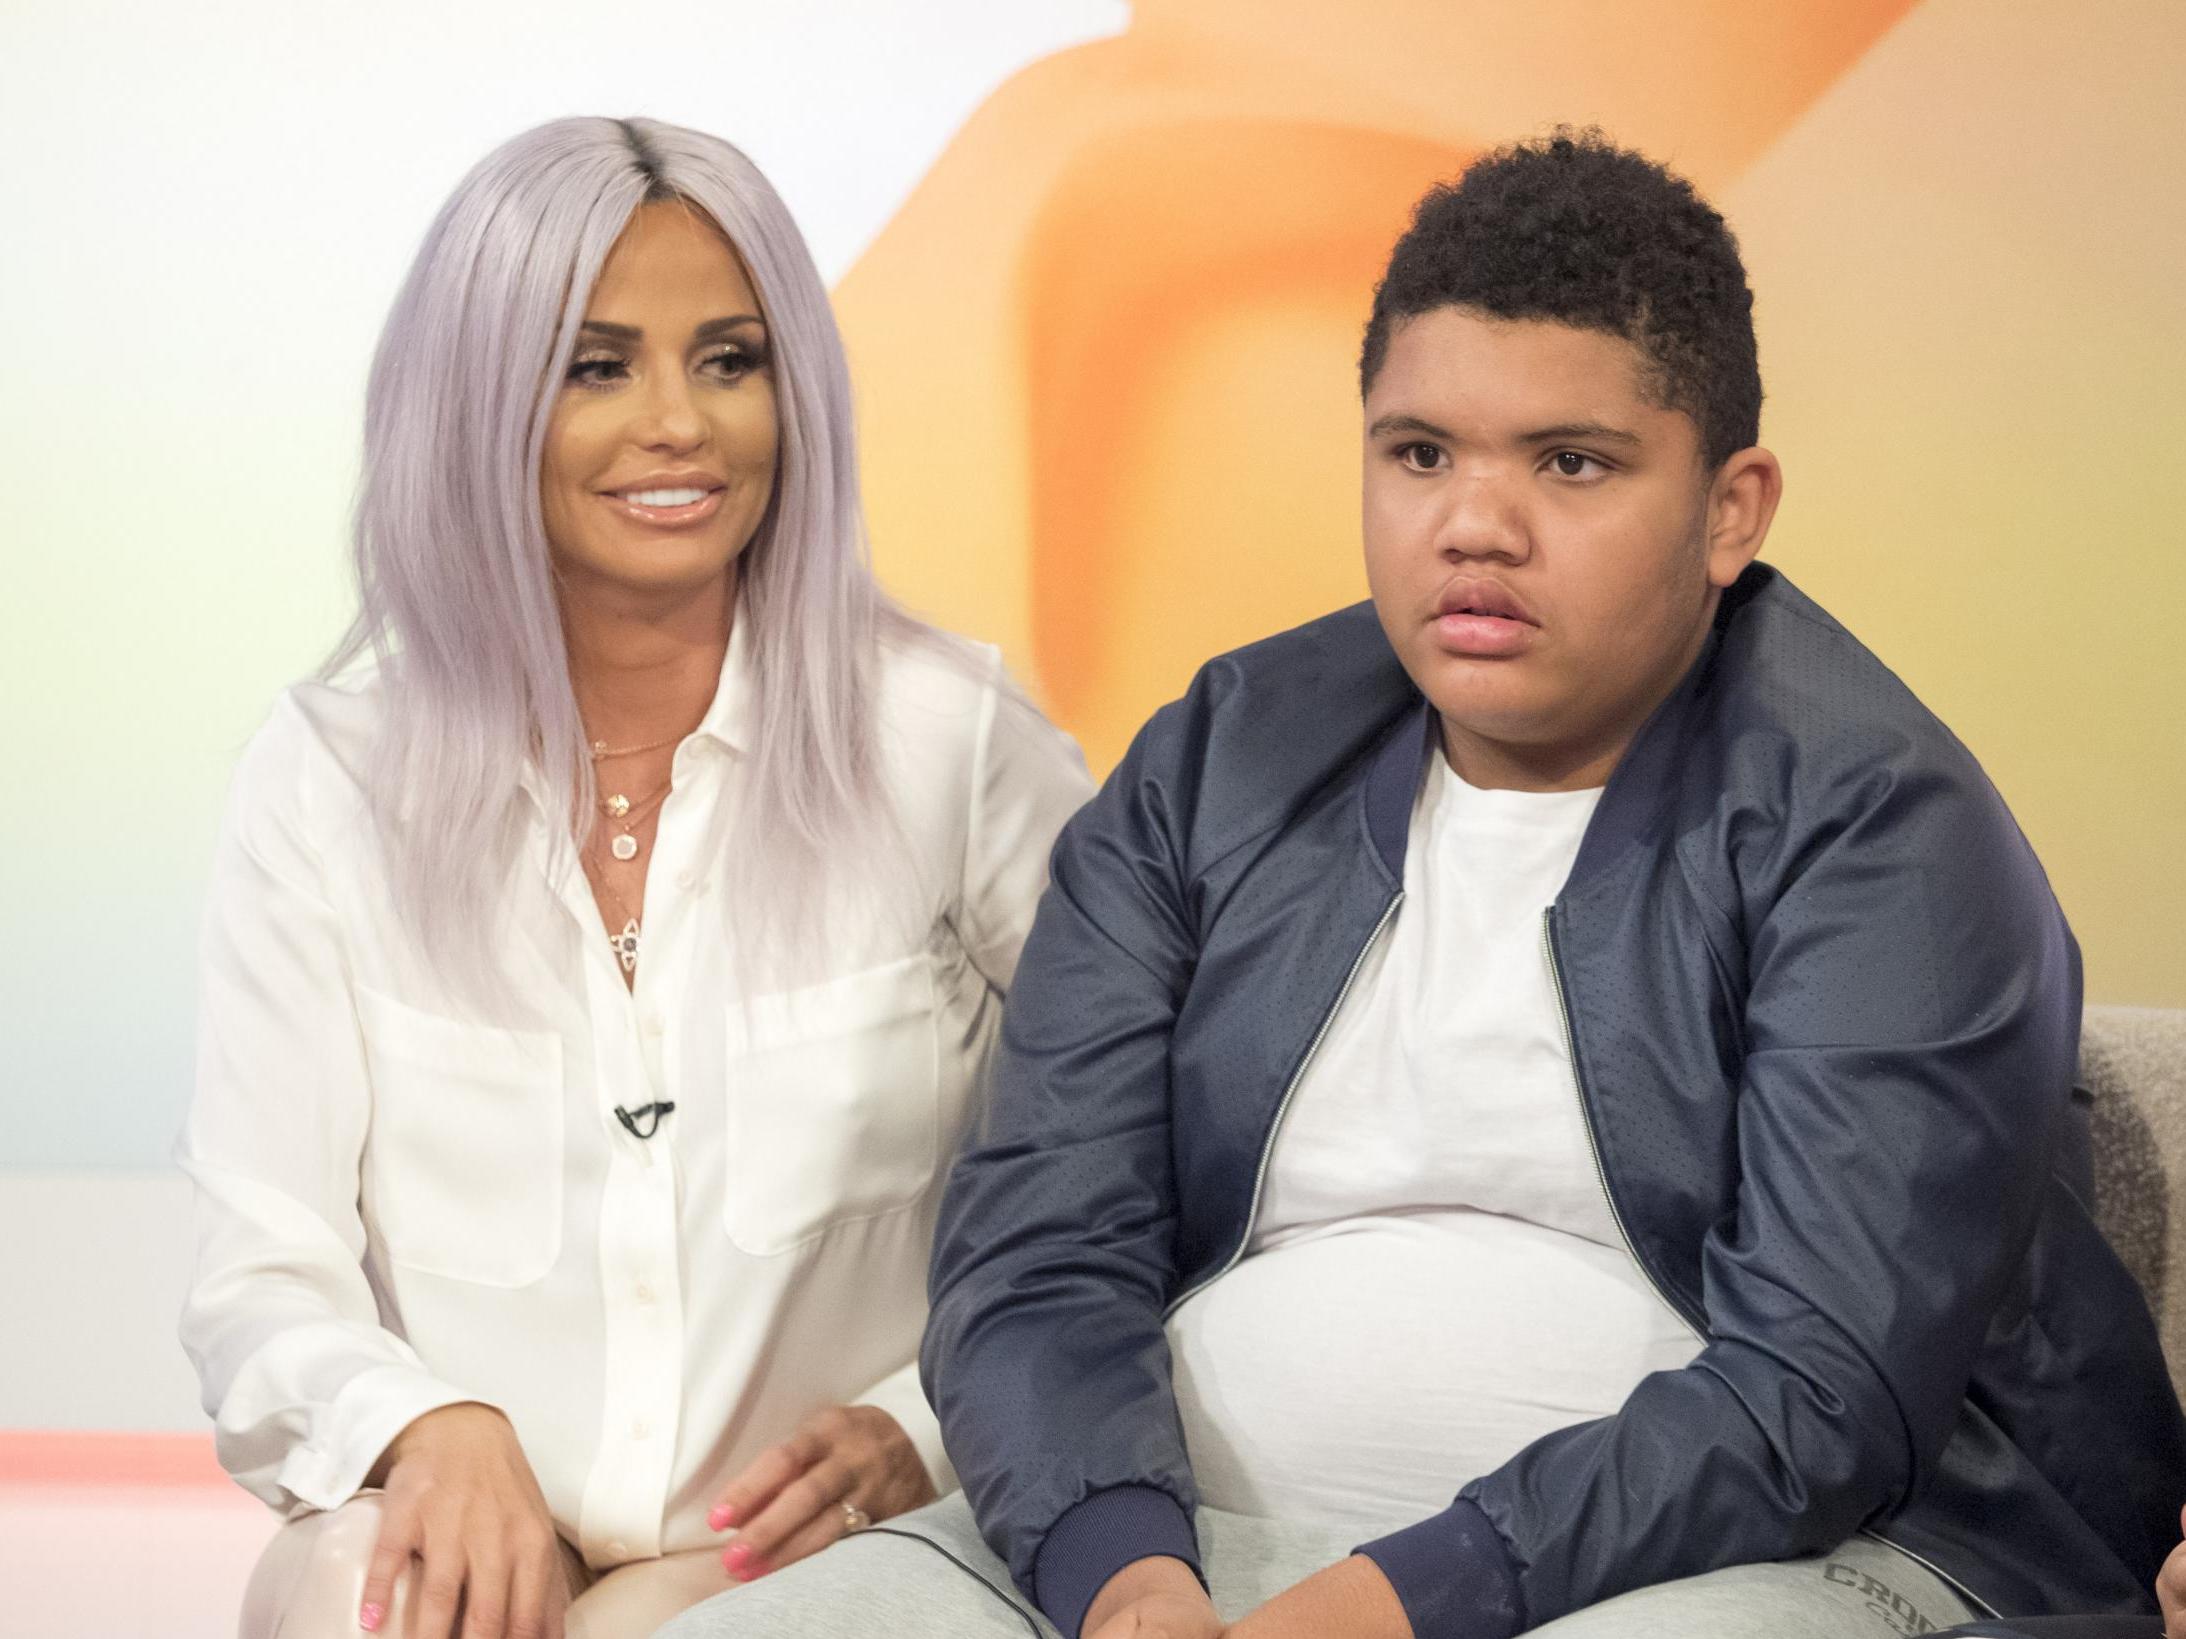 Katie Price and Harvey Price on Loose Women, 17 May 2016